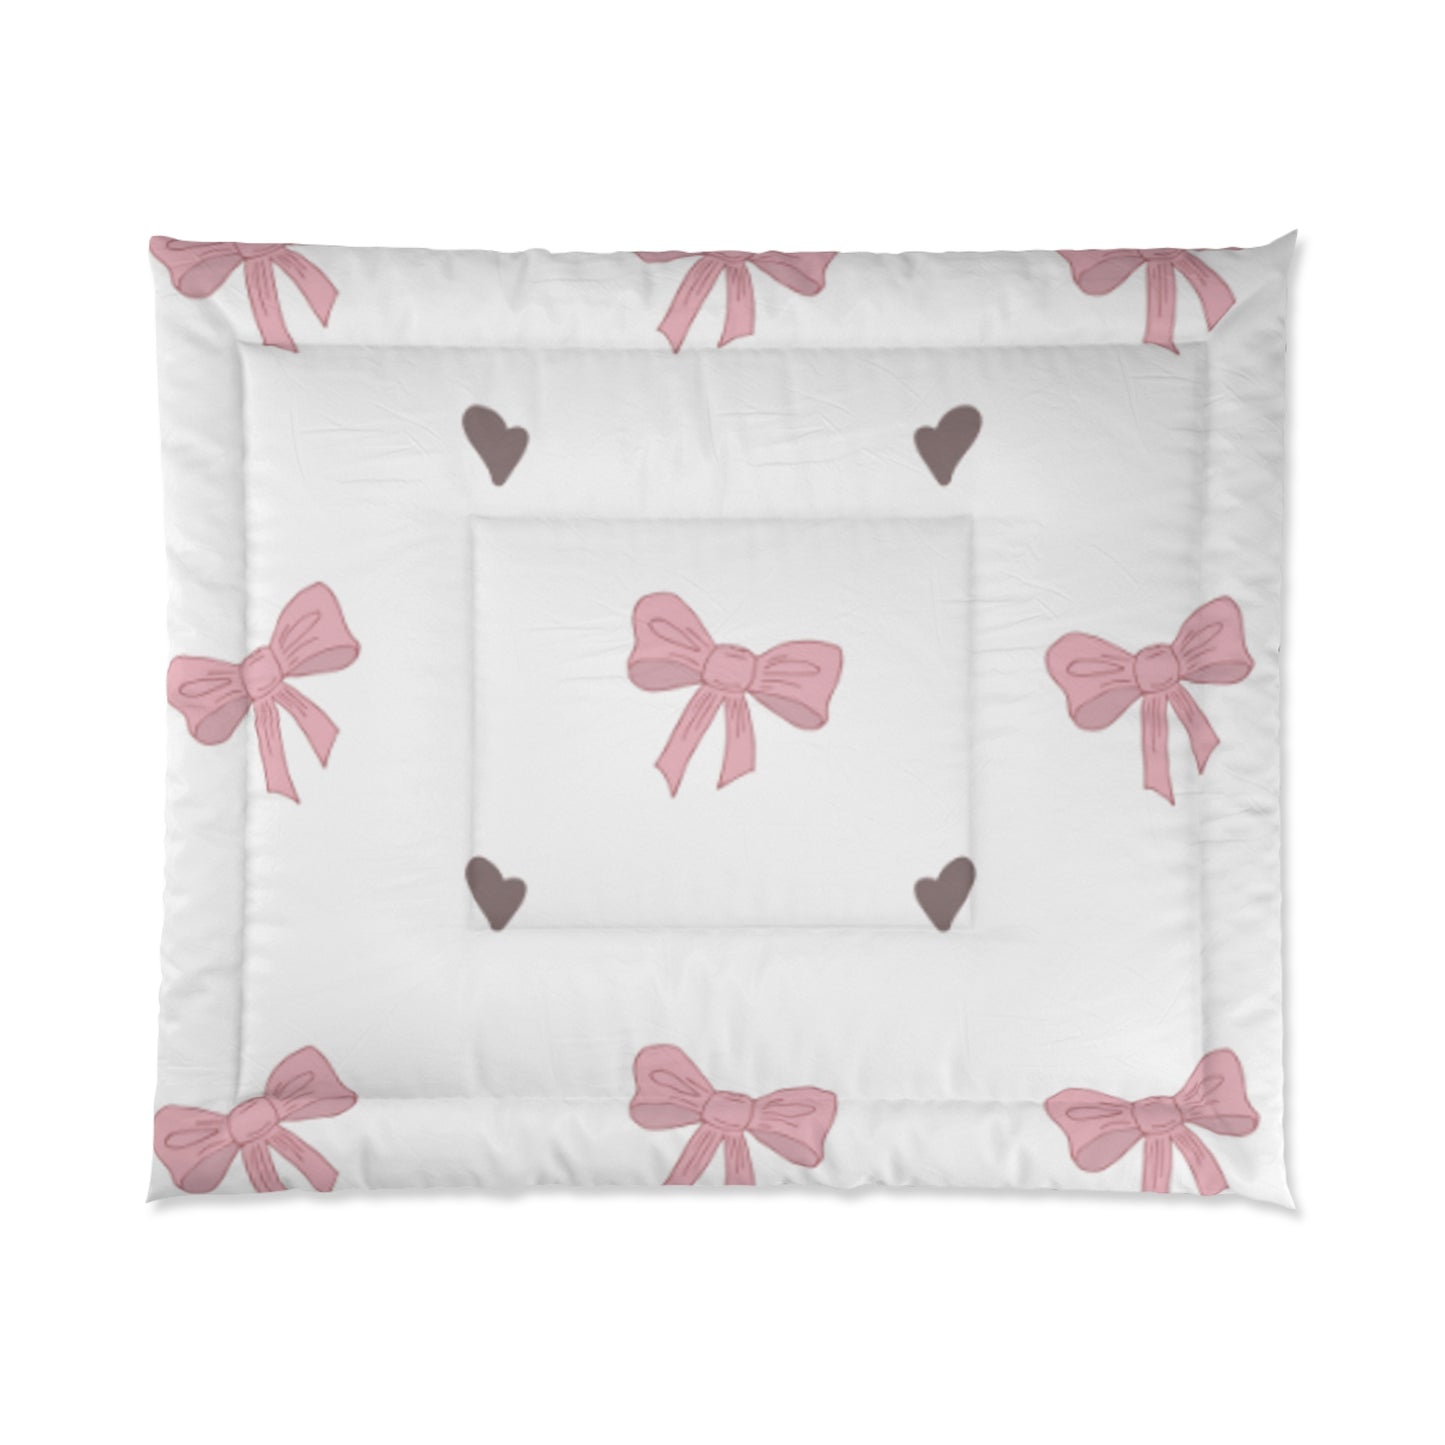 Bows N' Hearts Comforter